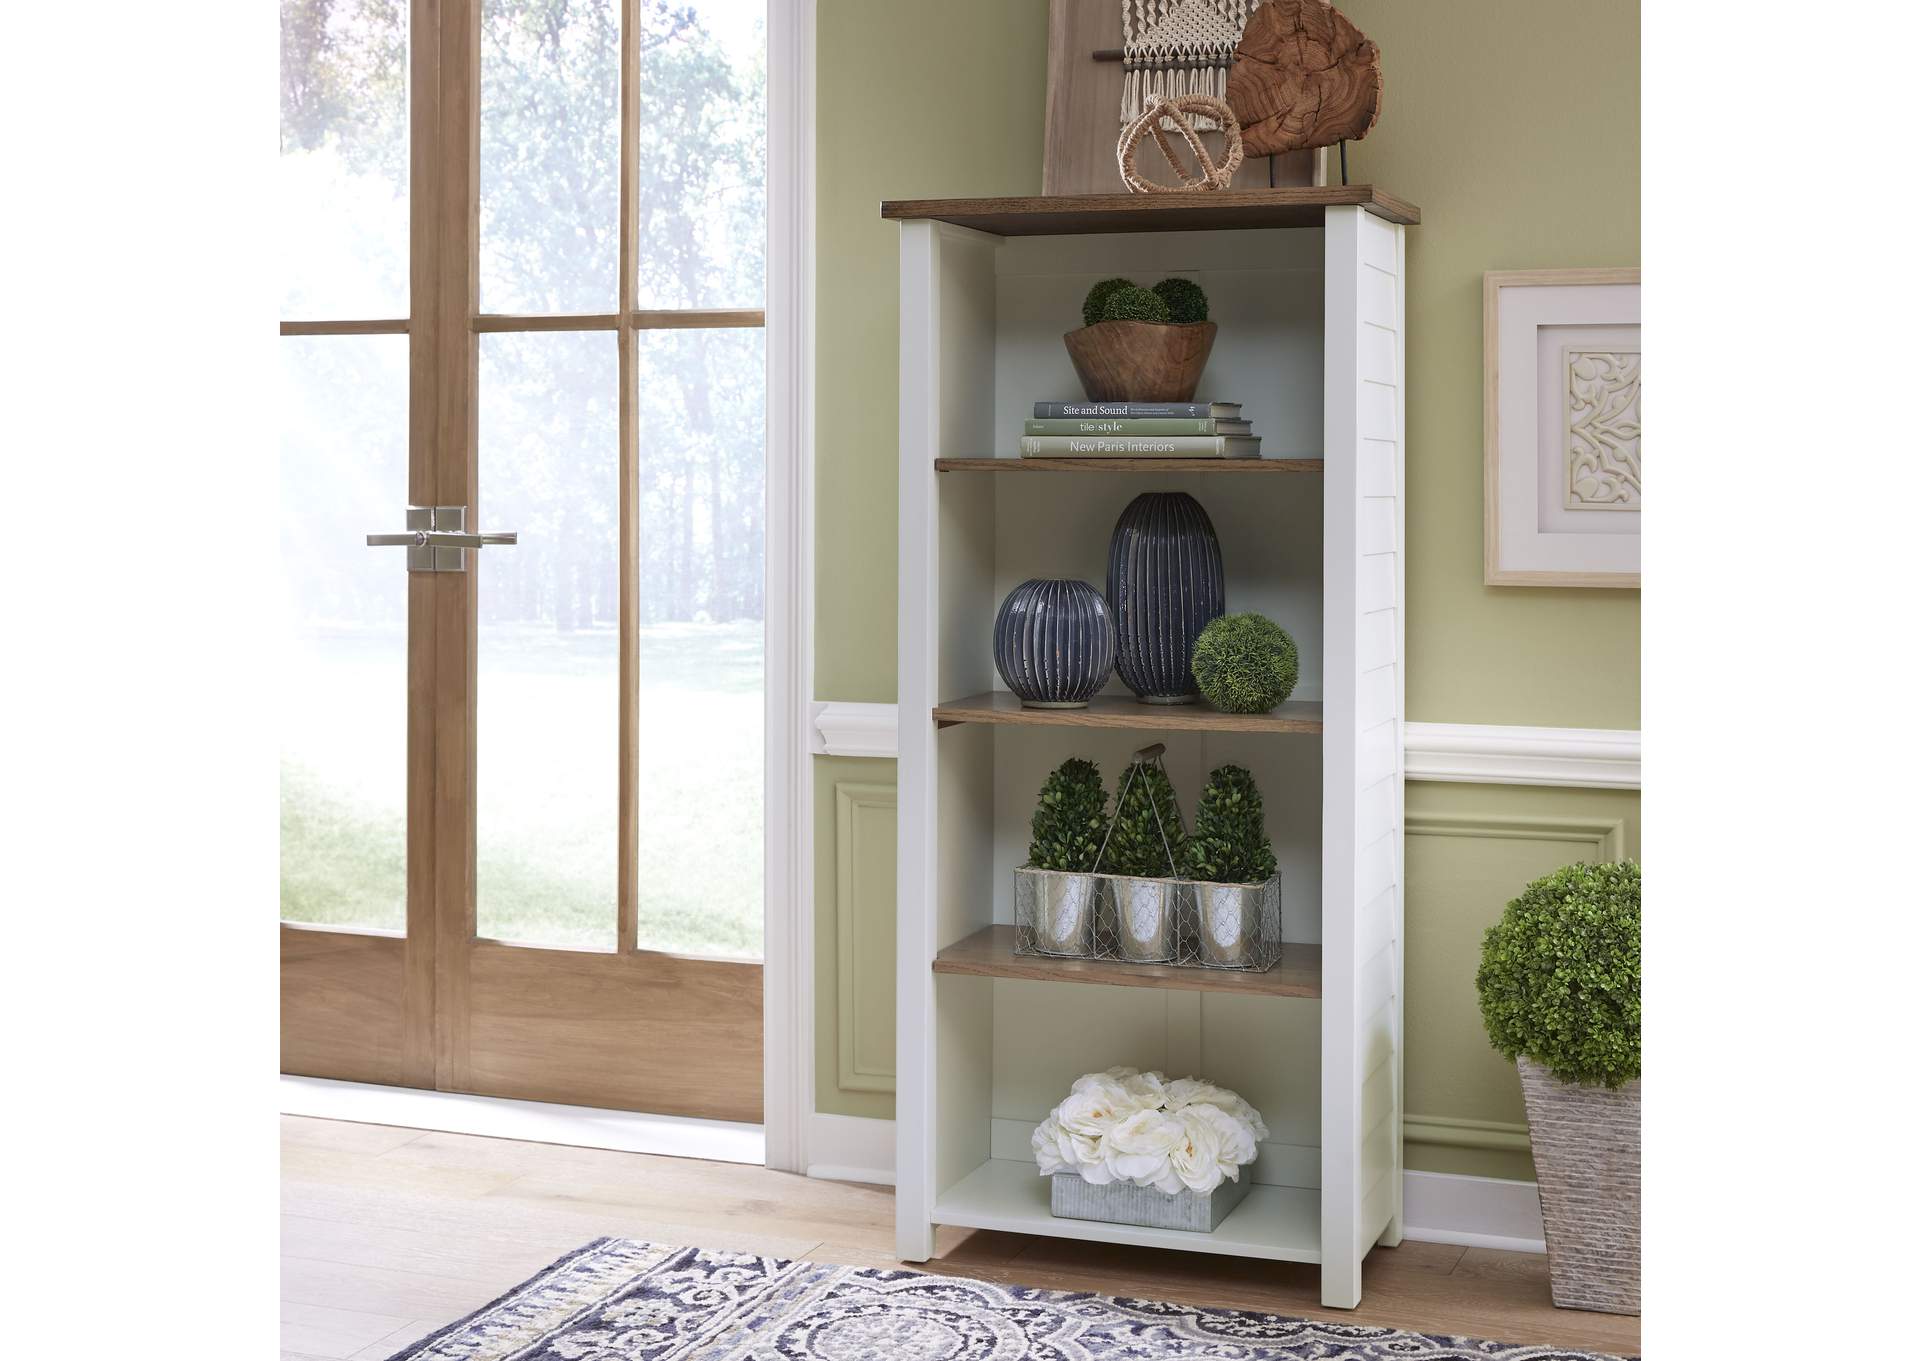 District Bookcase By Homestyles,Homestyles